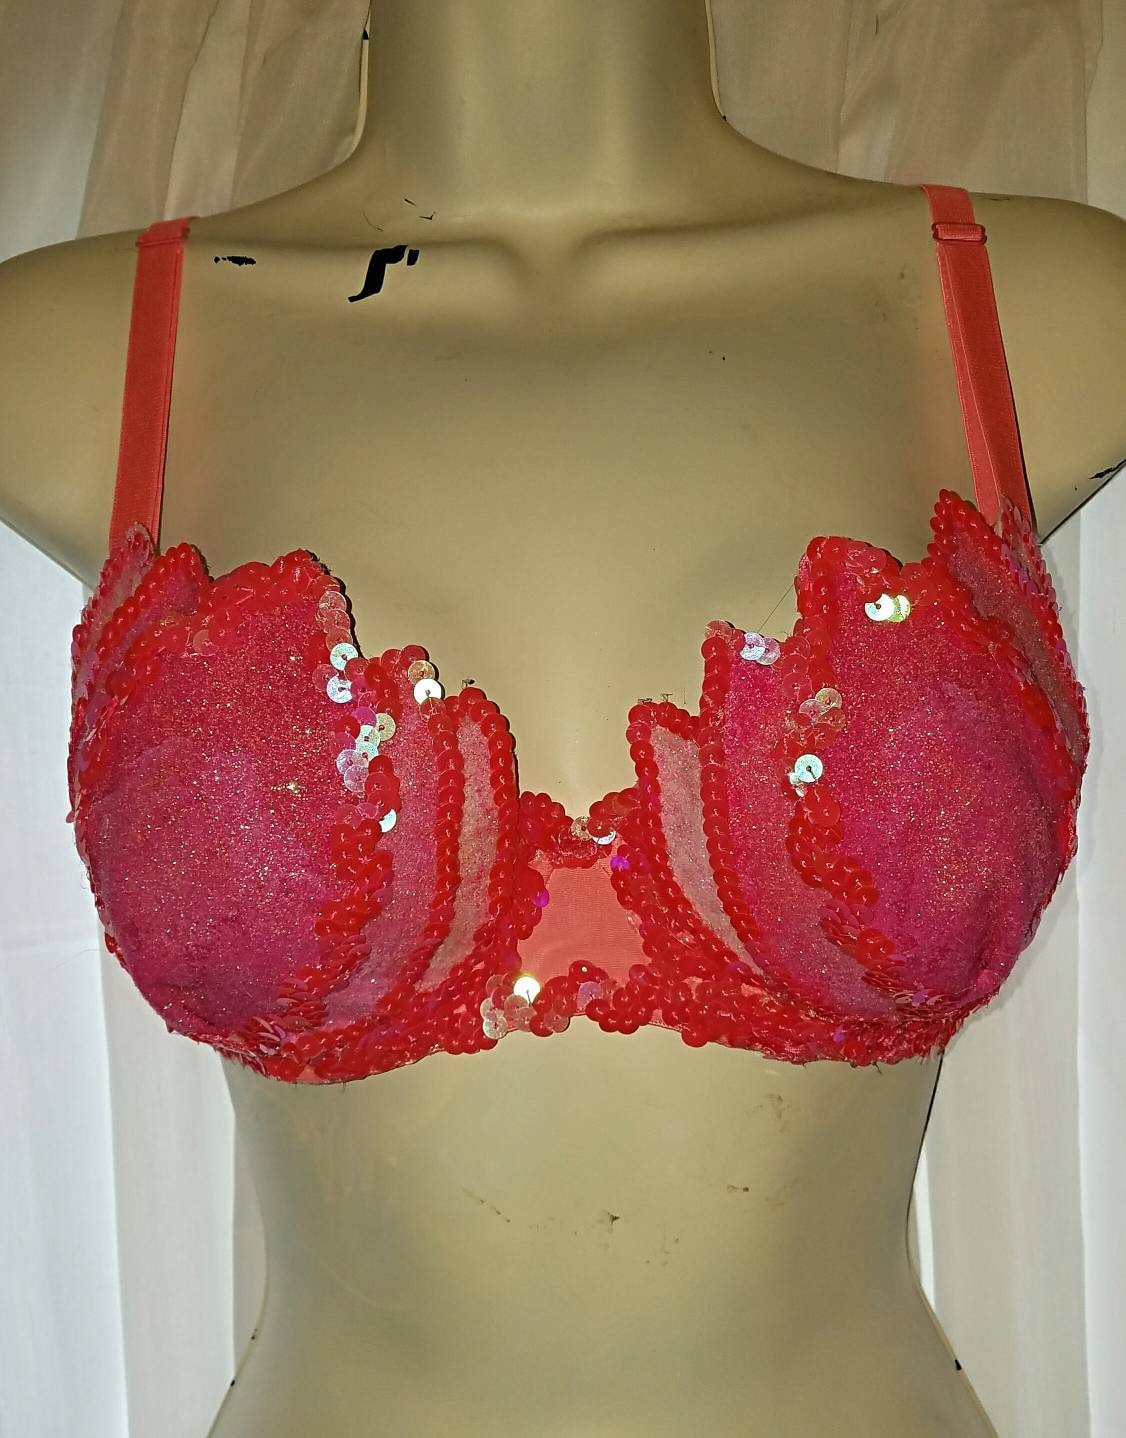 Barbie Inspired Flower Rave Bra / Pink and Turquoise Festival Top